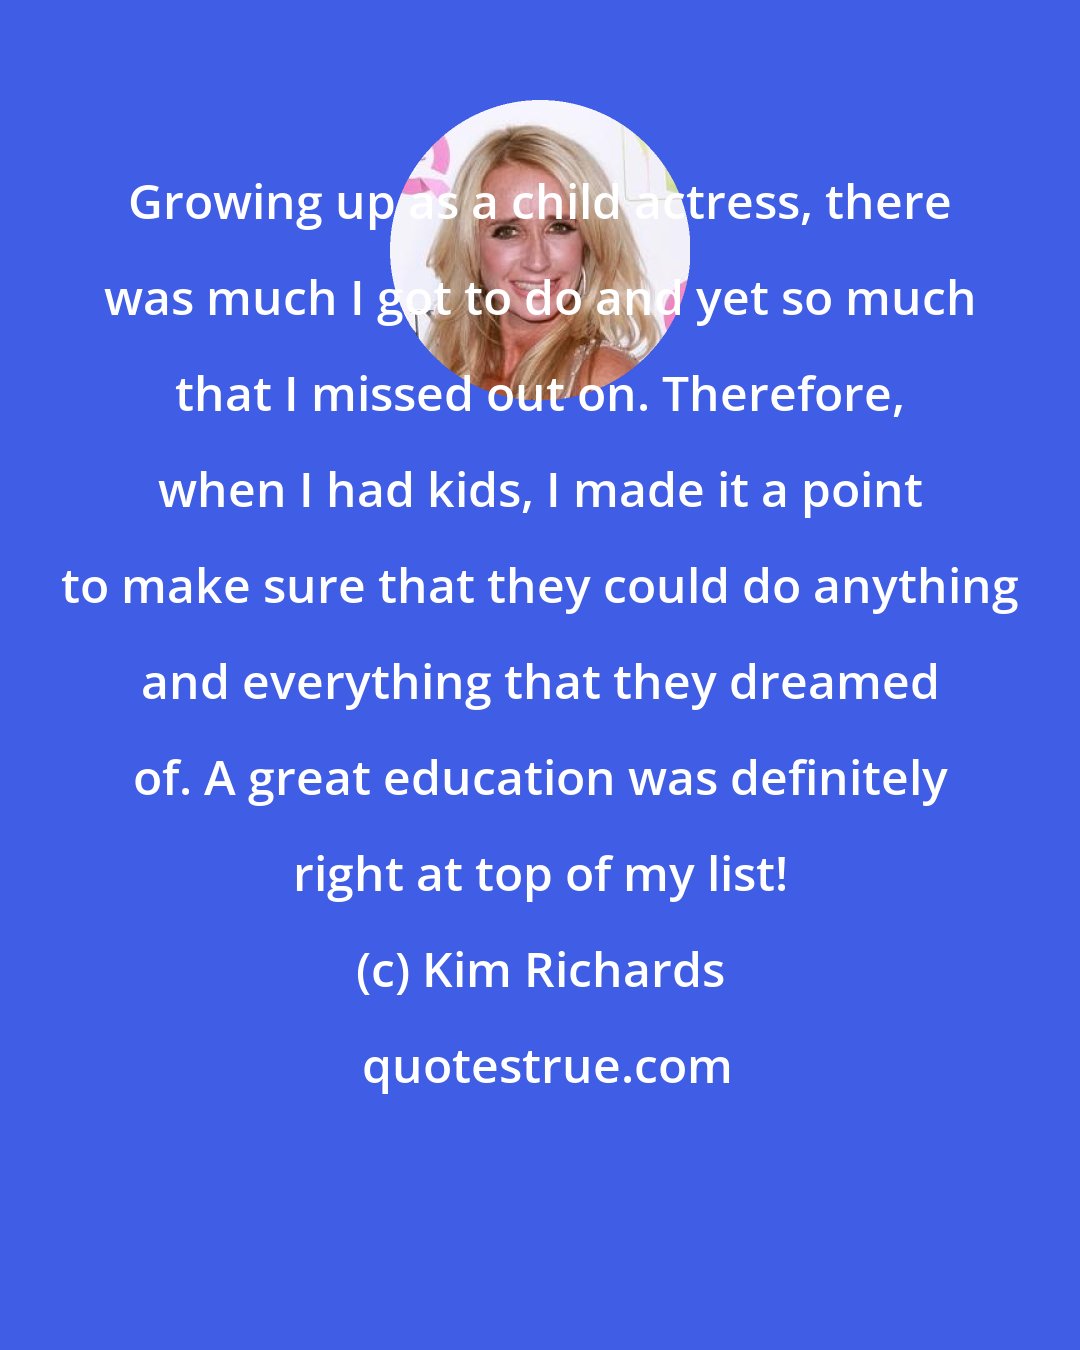 Kim Richards: Growing up as a child actress, there was much I got to do and yet so much that I missed out on. Therefore, when I had kids, I made it a point to make sure that they could do anything and everything that they dreamed of. A great education was definitely right at top of my list!